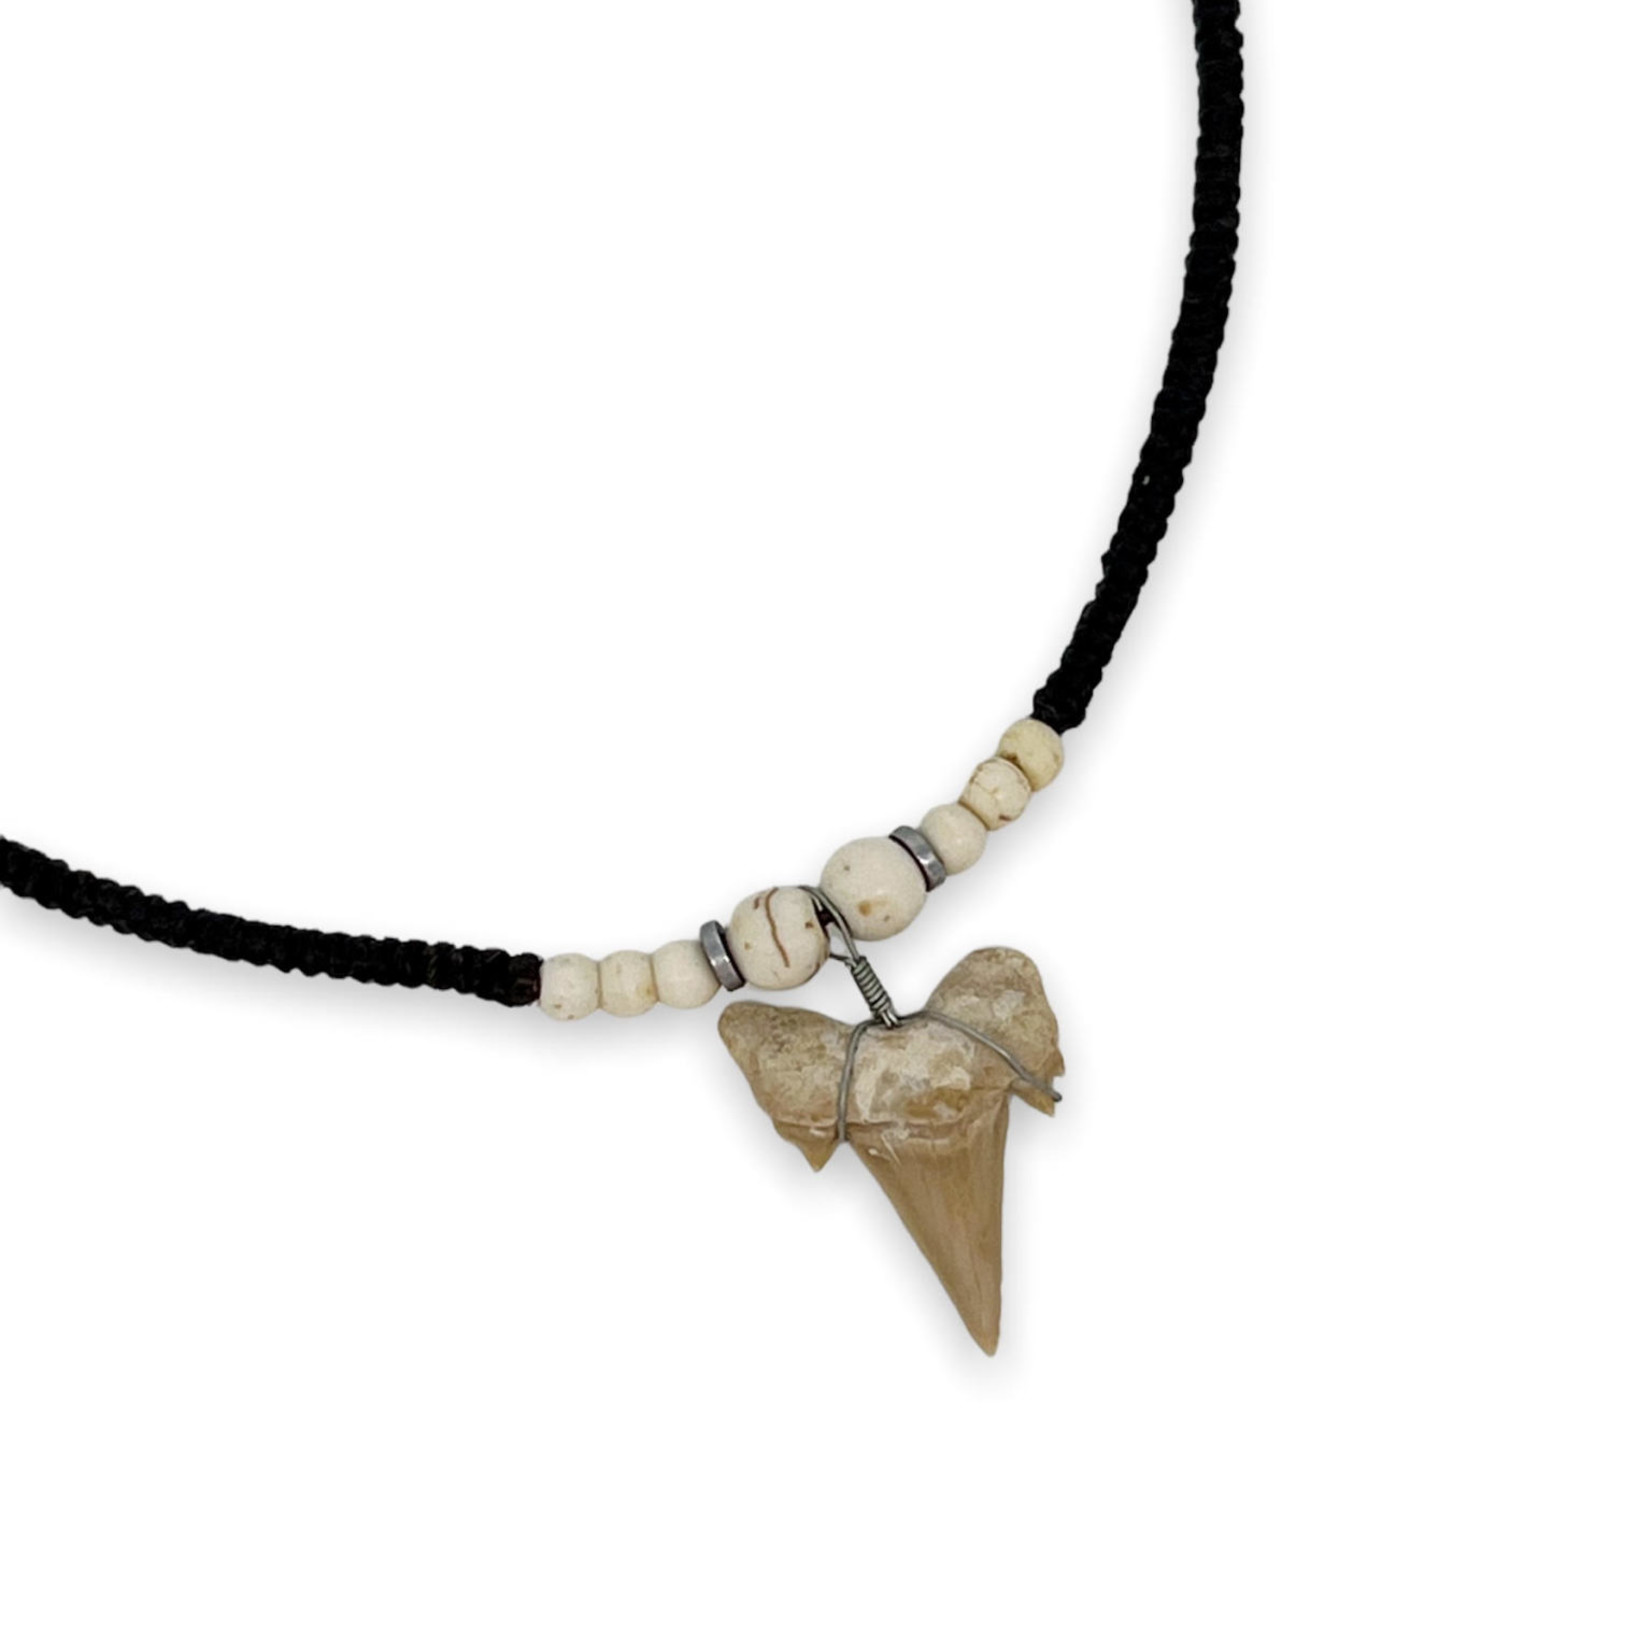 Shark Tooth Necklace on Wax Cord with White Howlite